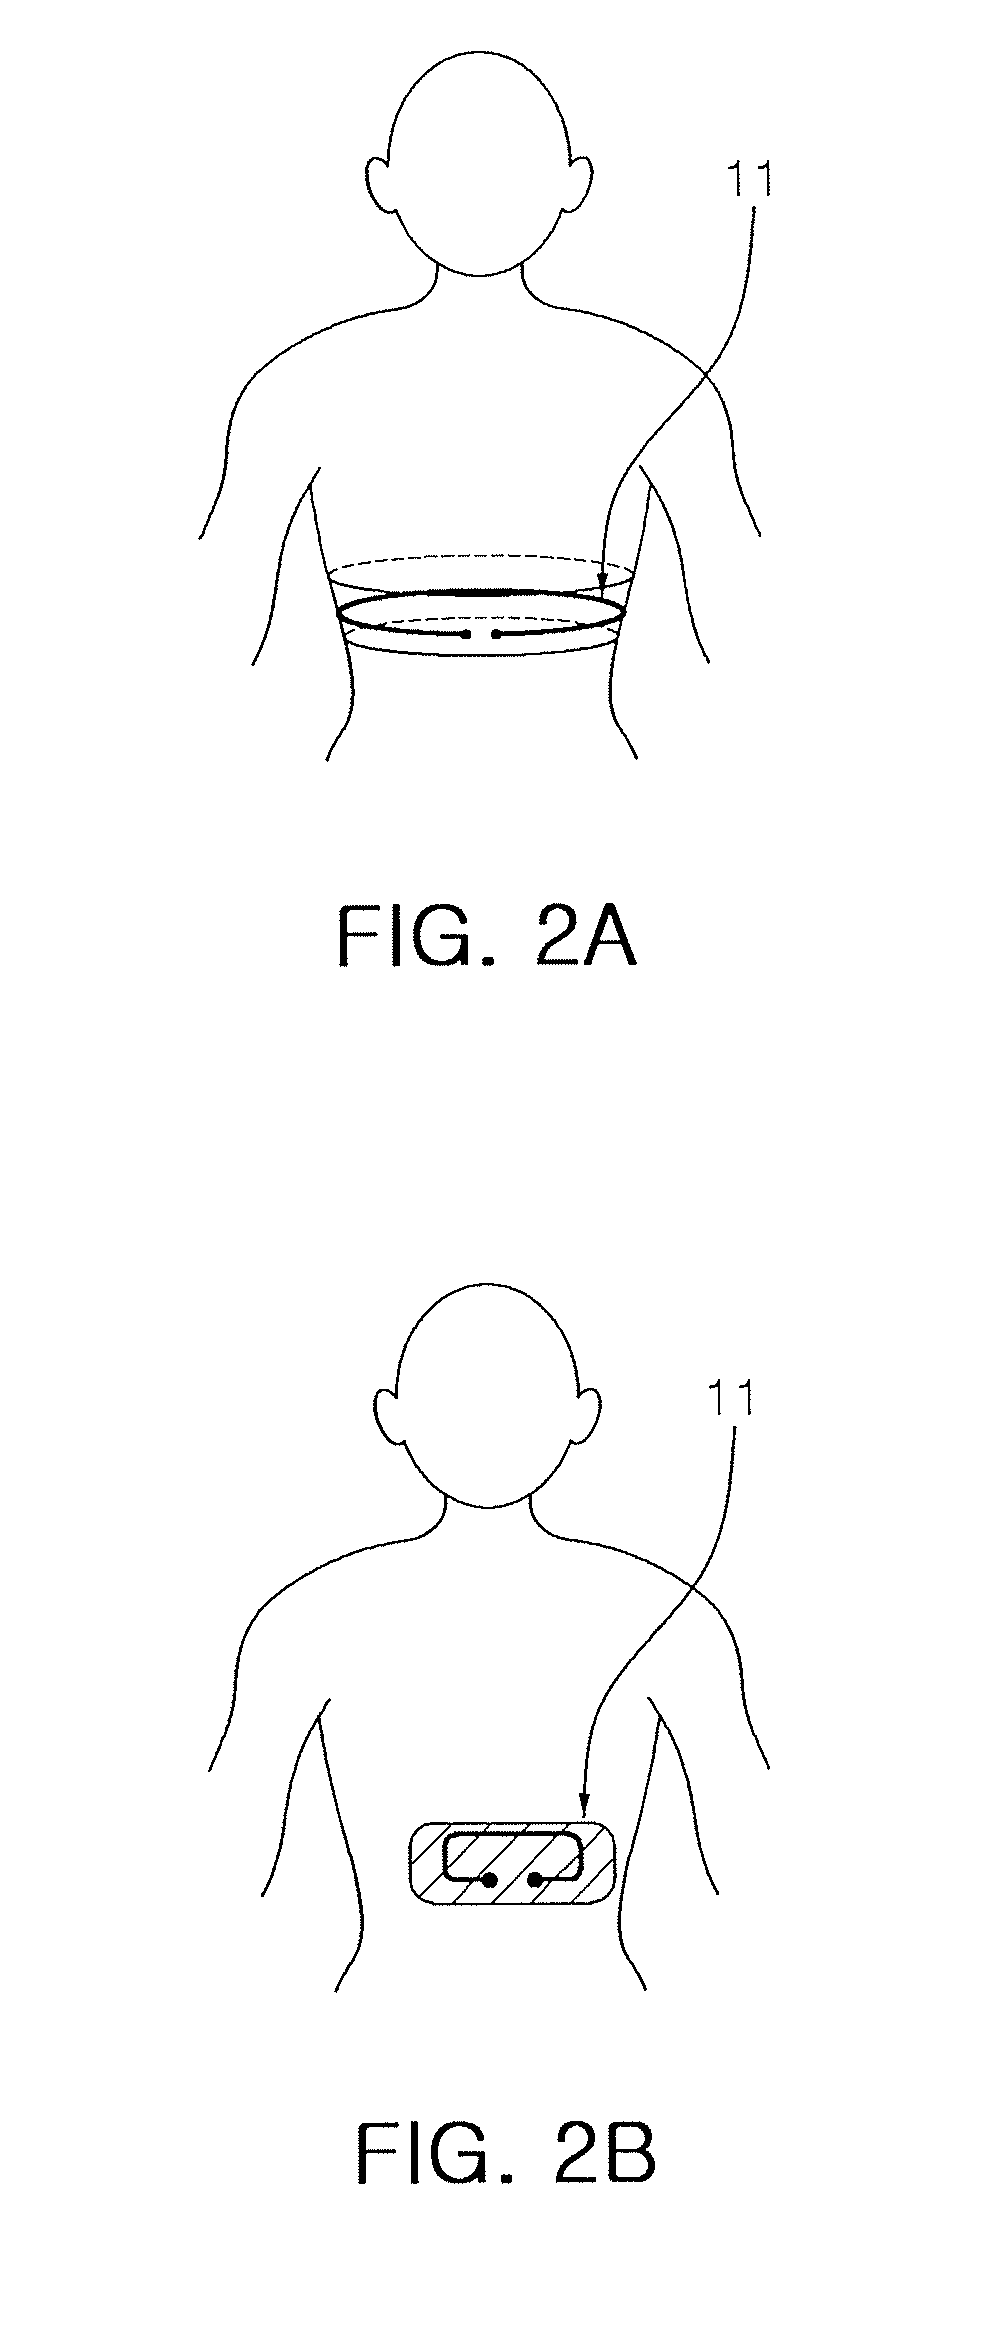 Apparatus and method for monitoring health index using electroconductive fiber